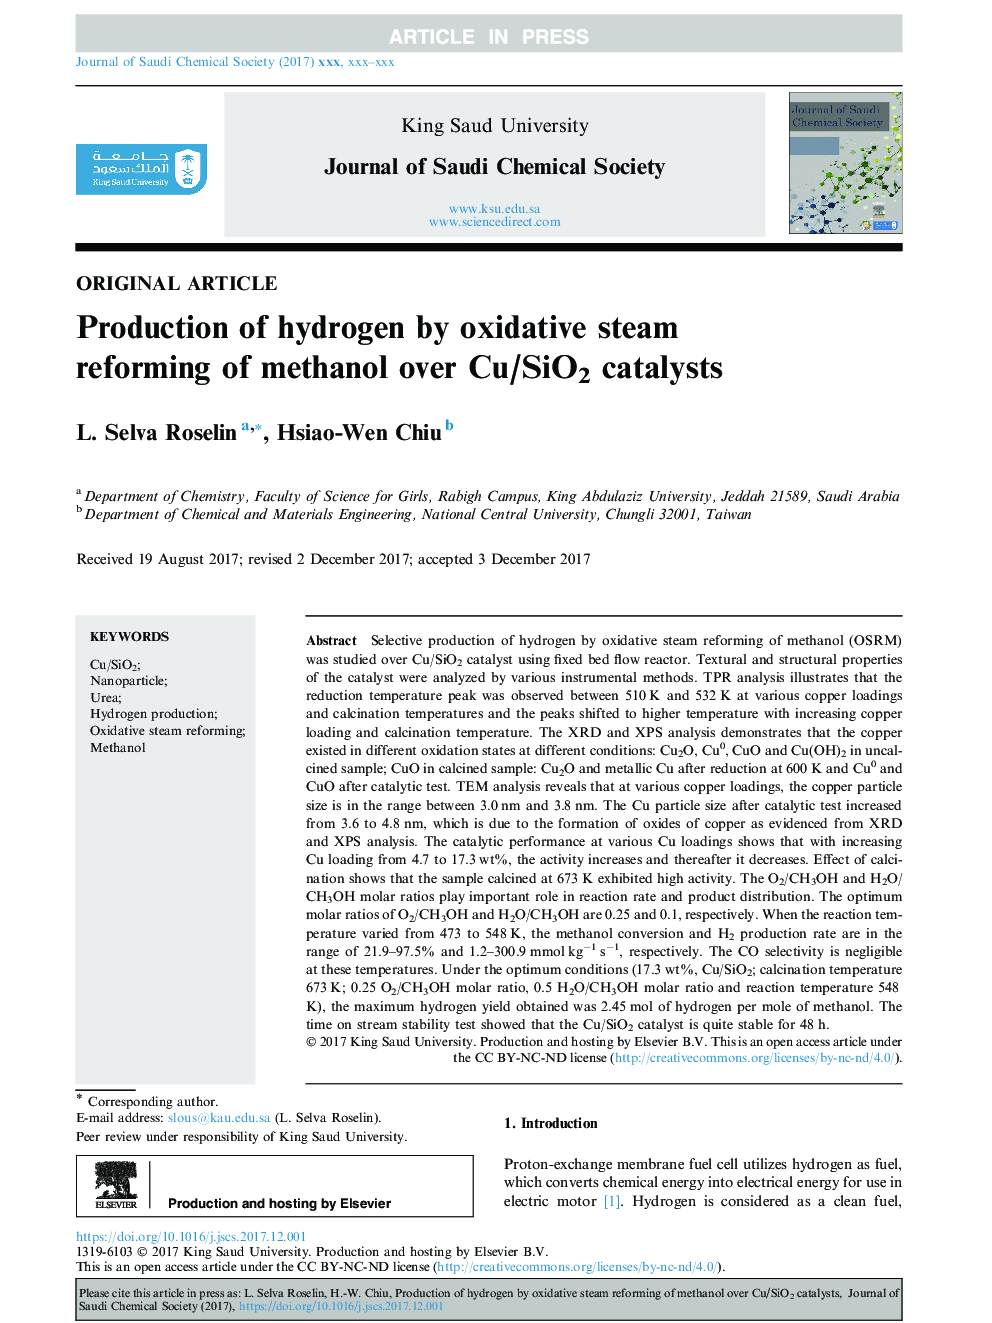 Production of hydrogen by oxidative steam reforming of methanol over Cu/SiO2 catalysts